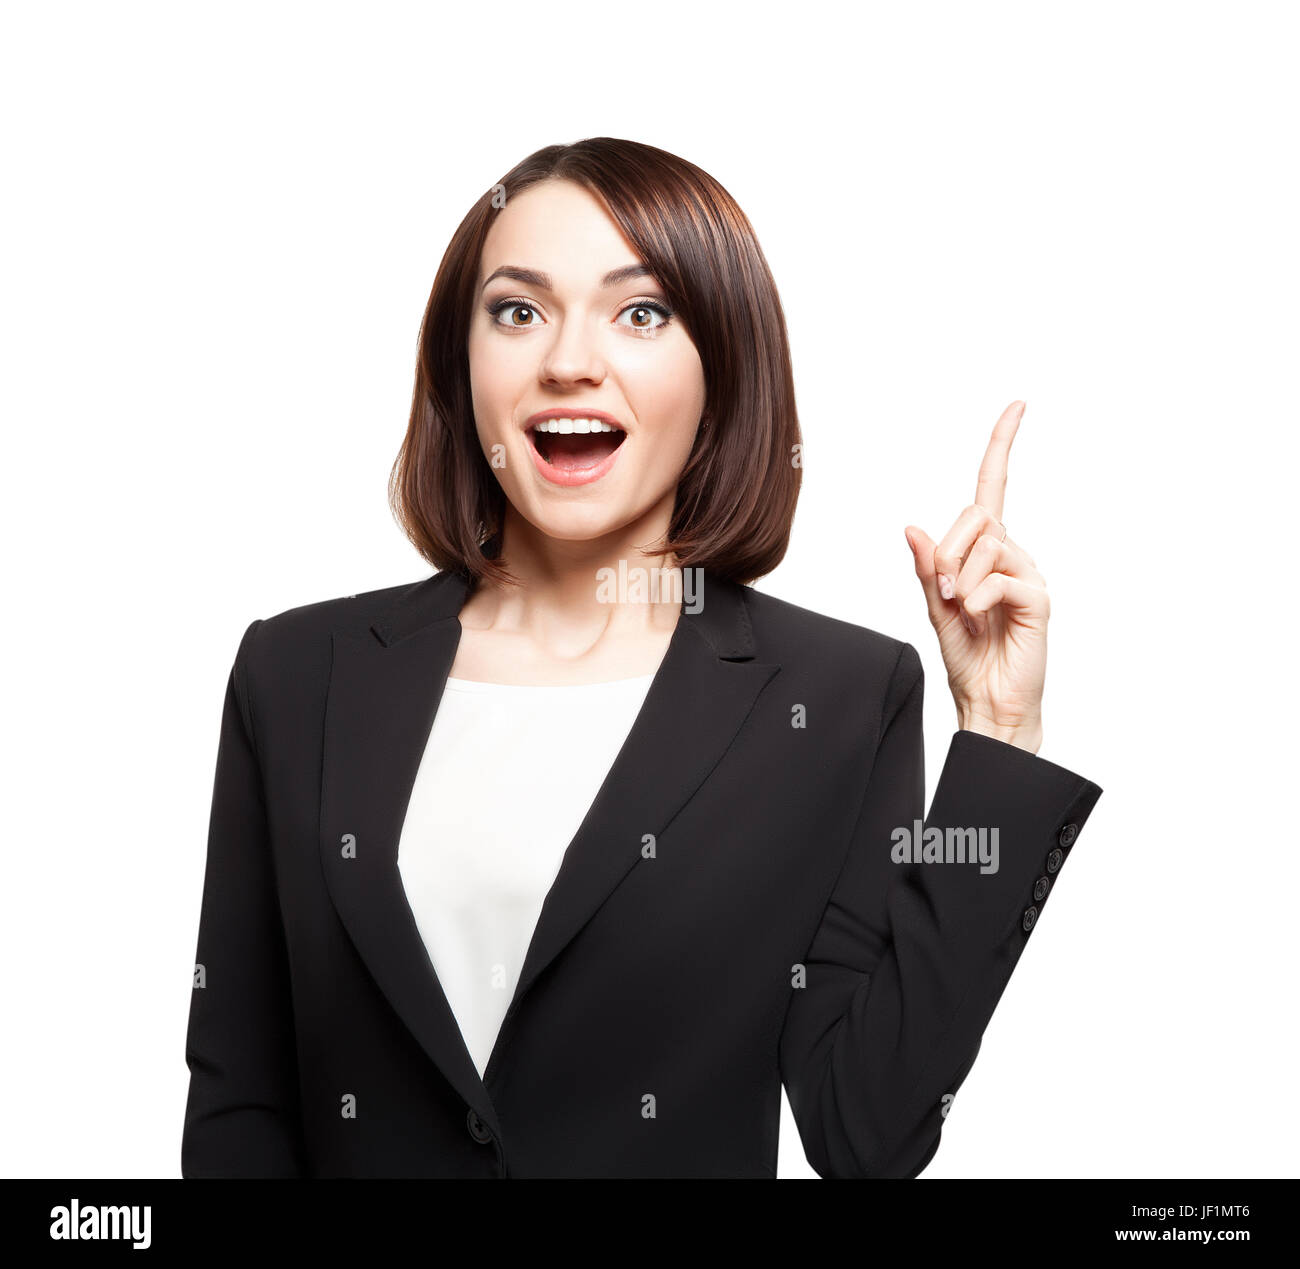 Business woman came to the brilliant idea Stock Photo